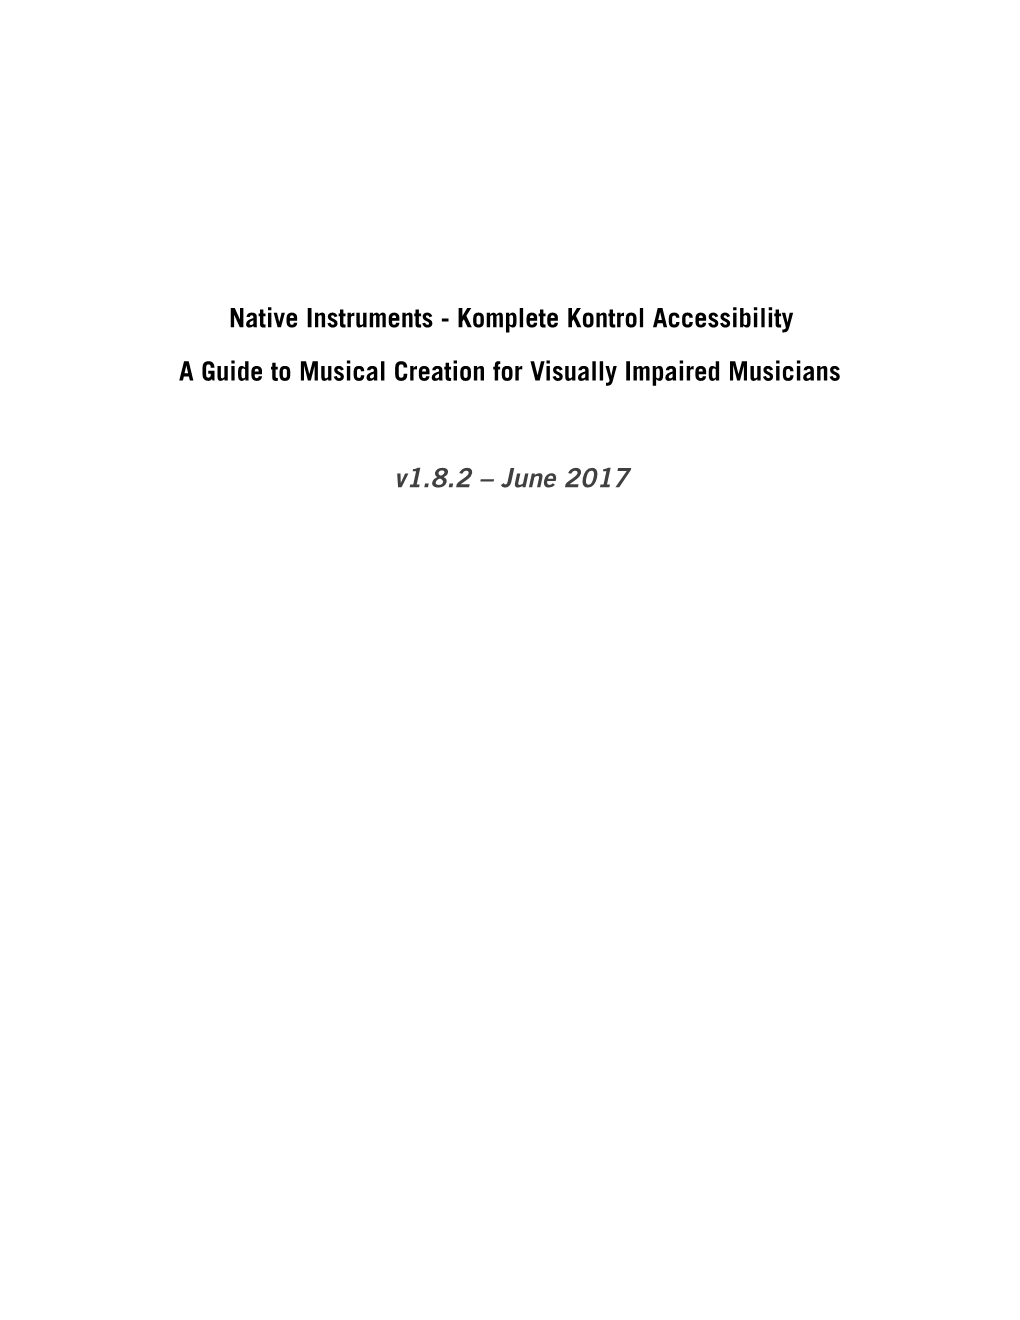 Native Instruments - Komplete Kontrol Accessibility a Guide to Musical Creation for Visually Impaired Musicians